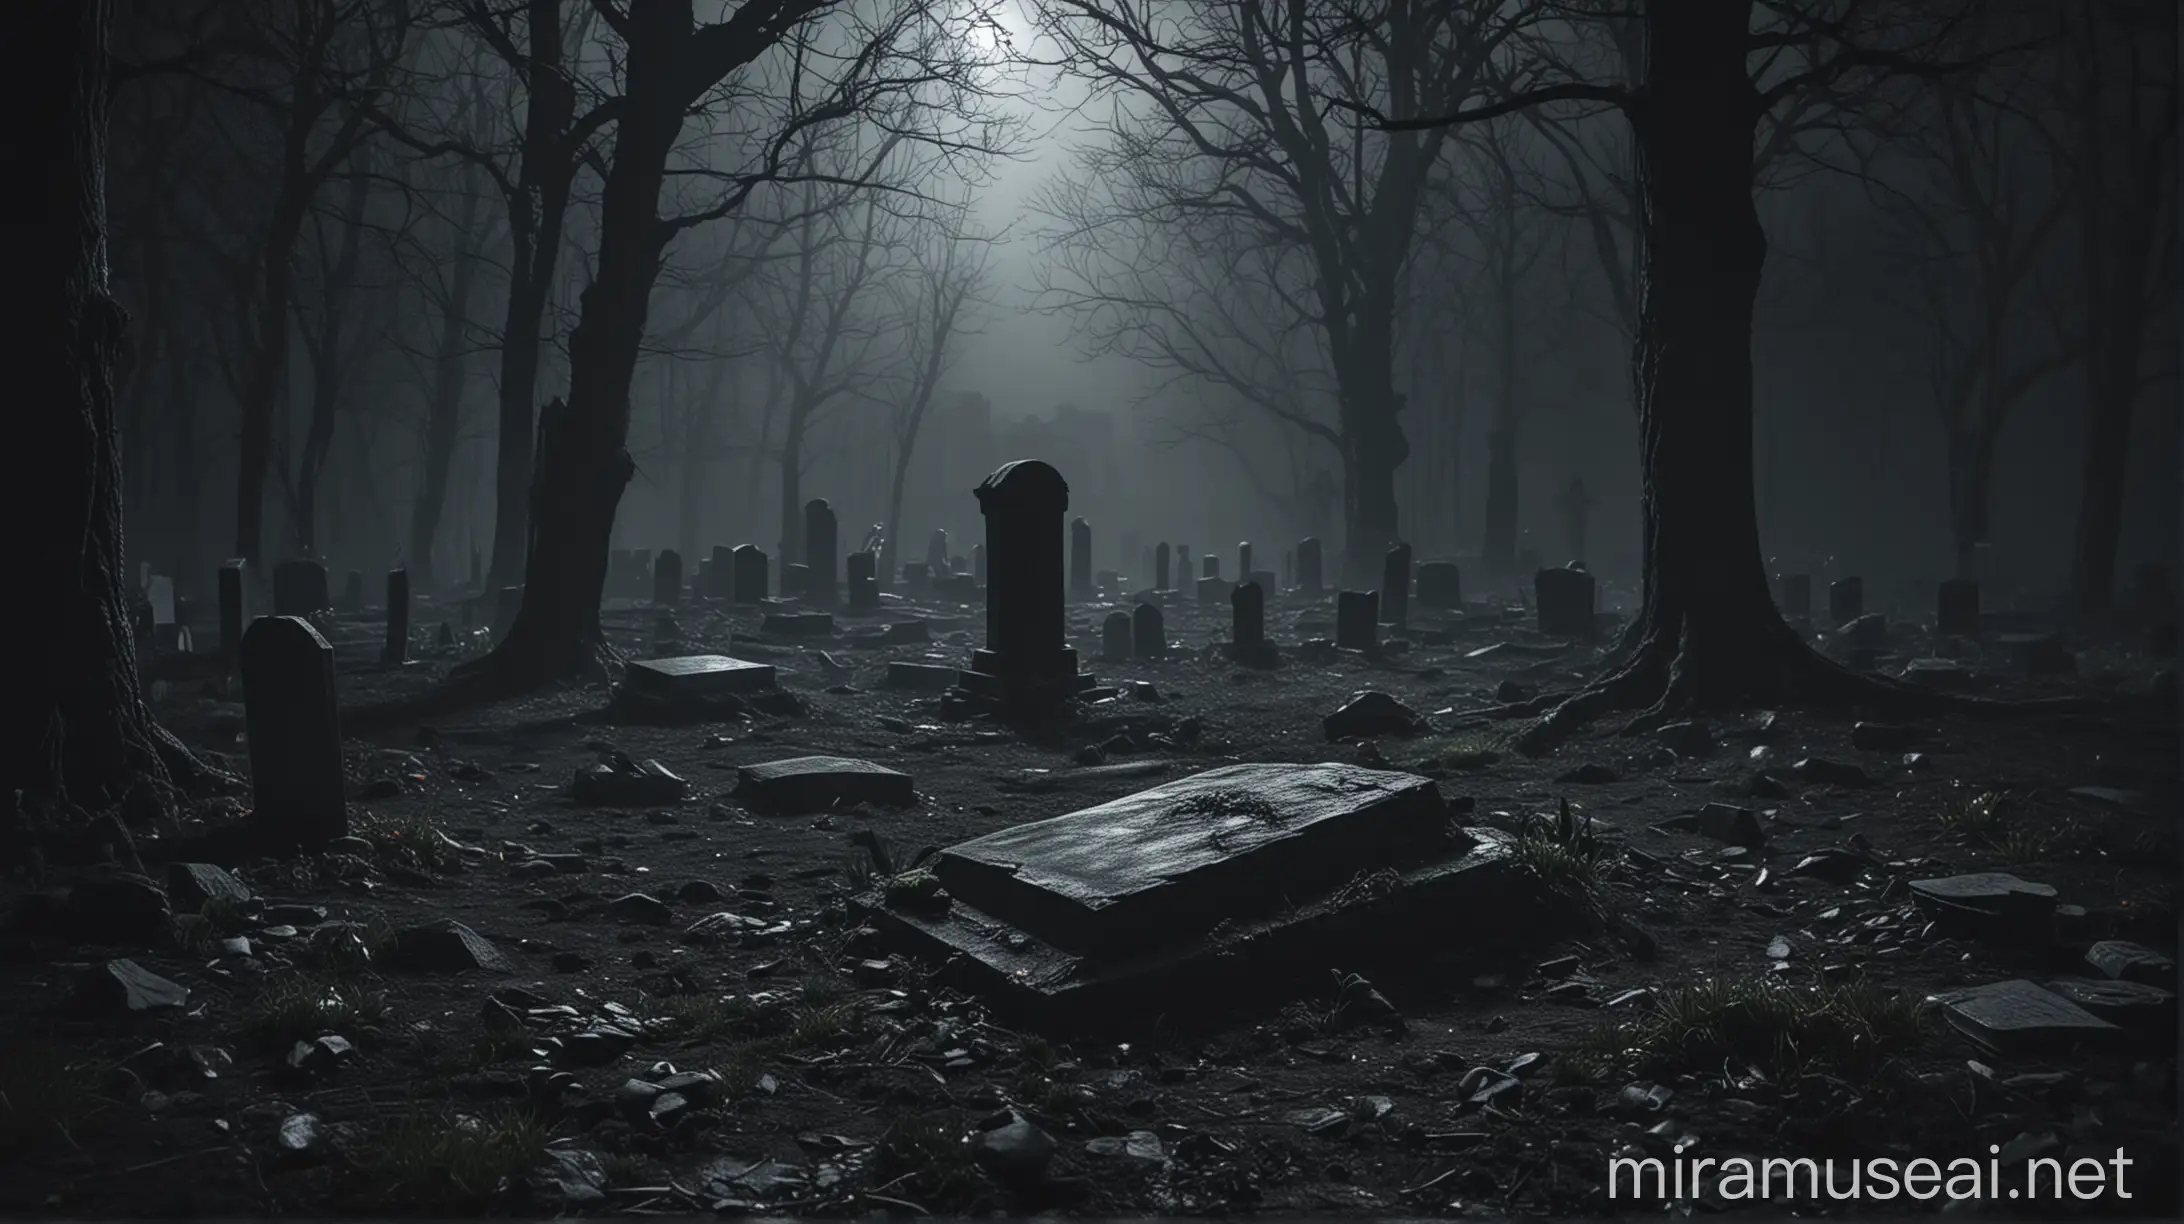 Grave in a mysterious dark environment